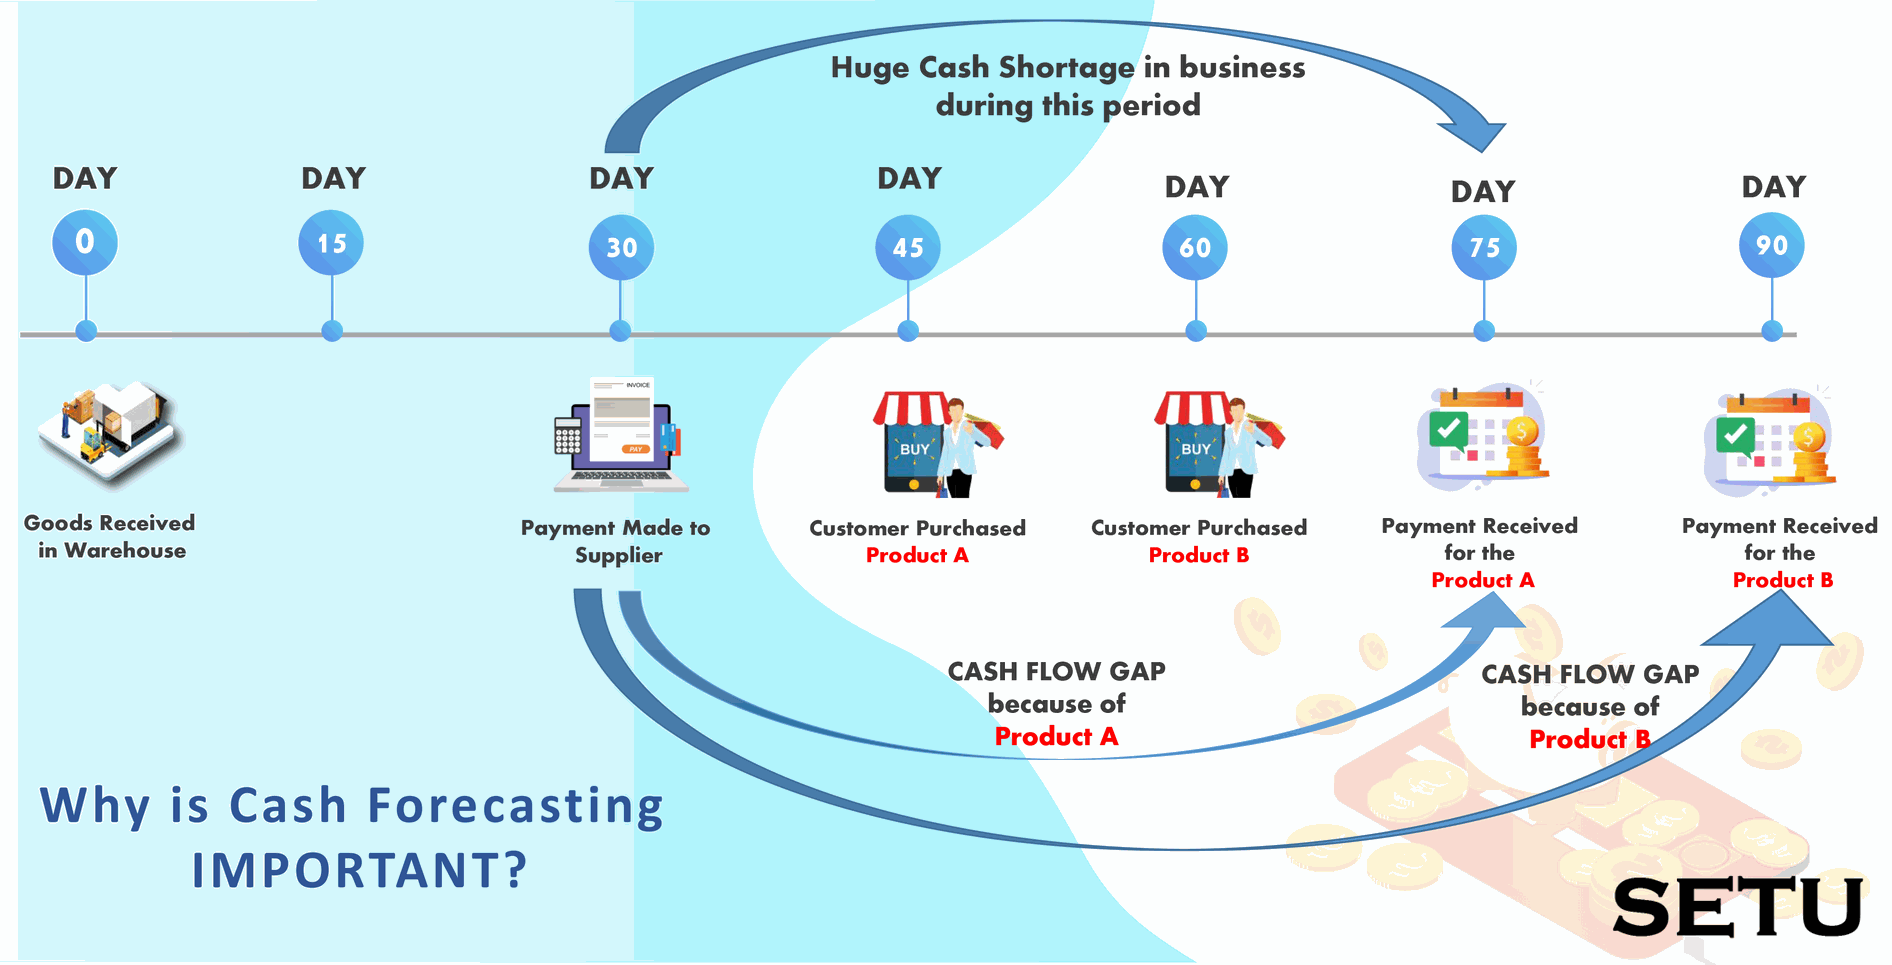 Why is Cash Forecasting Important?